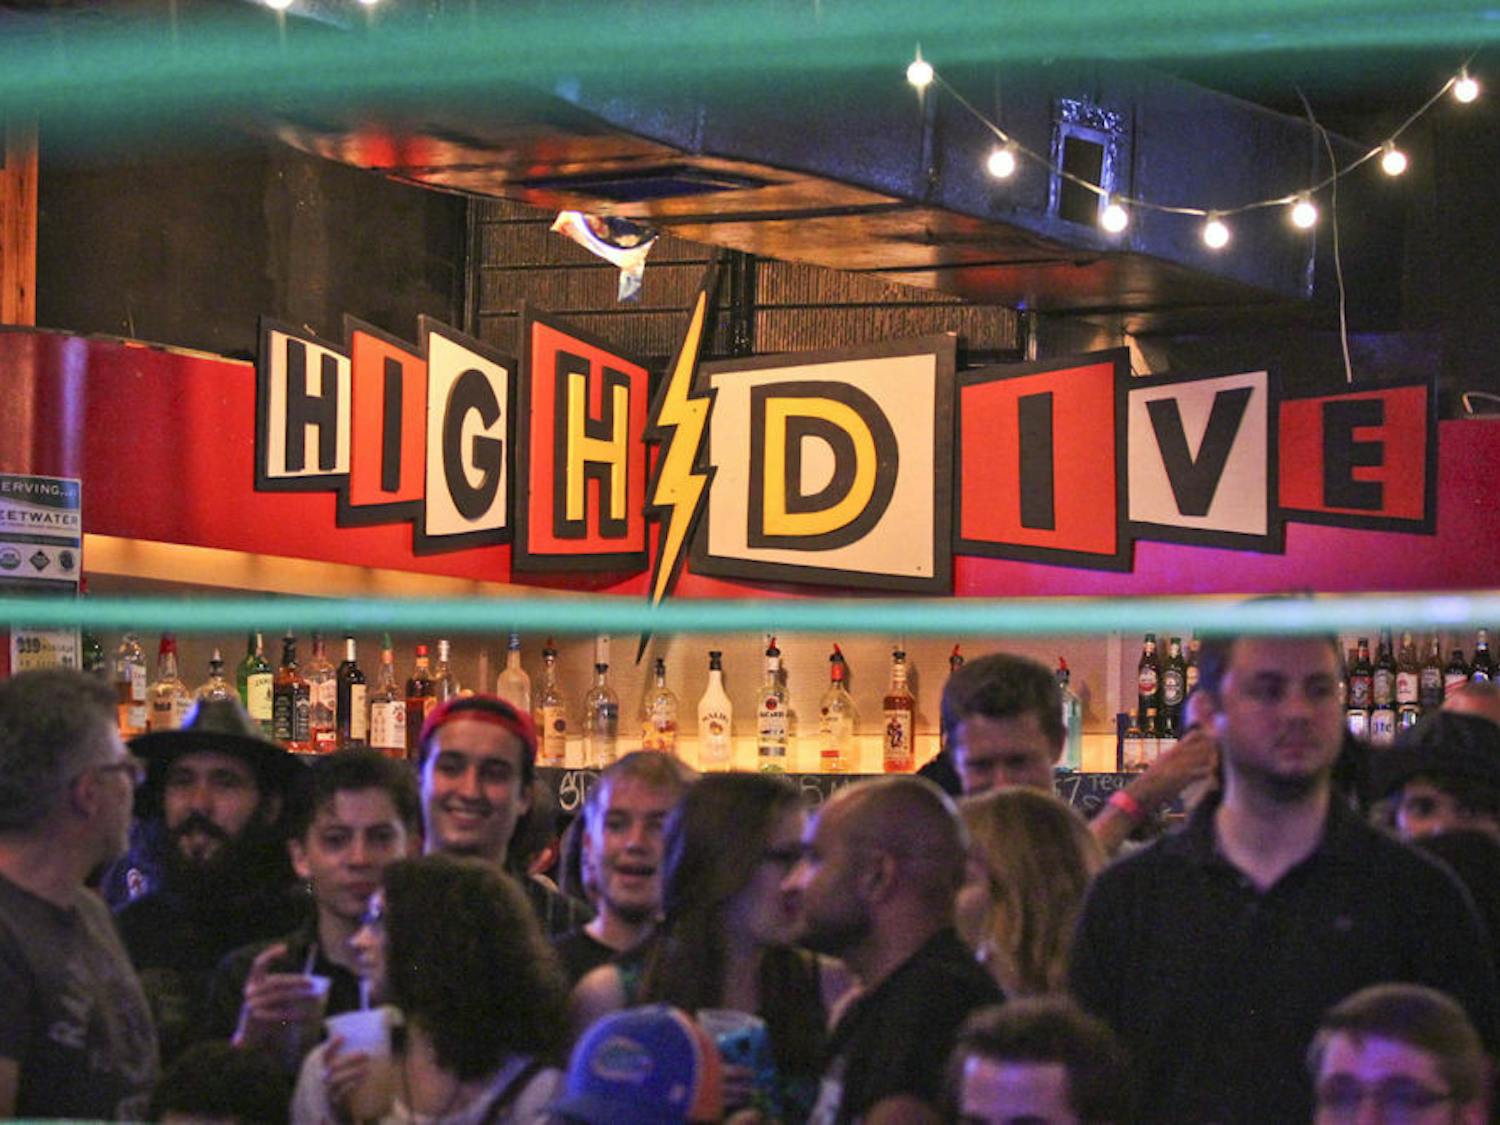 They’re loud, they’re proud, and despite their height, the professional wrestlers of Micro Championship Wrestling can take you down. The group put on a show of violence and variety Friday night at the High Dive.